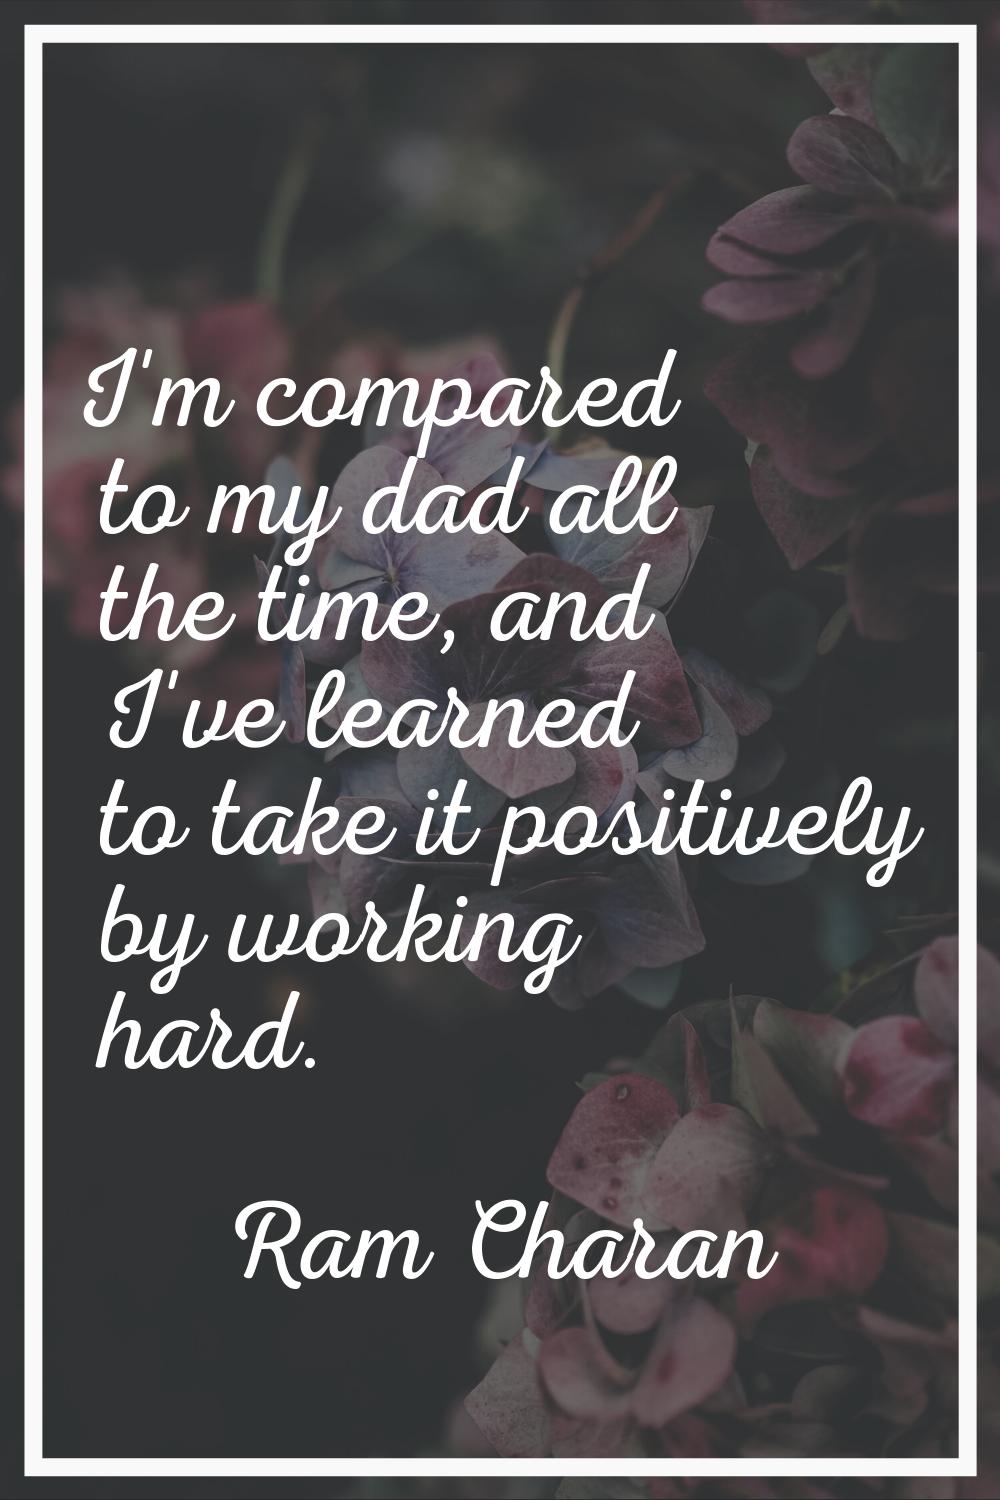 I'm compared to my dad all the time, and I've learned to take it positively by working hard.